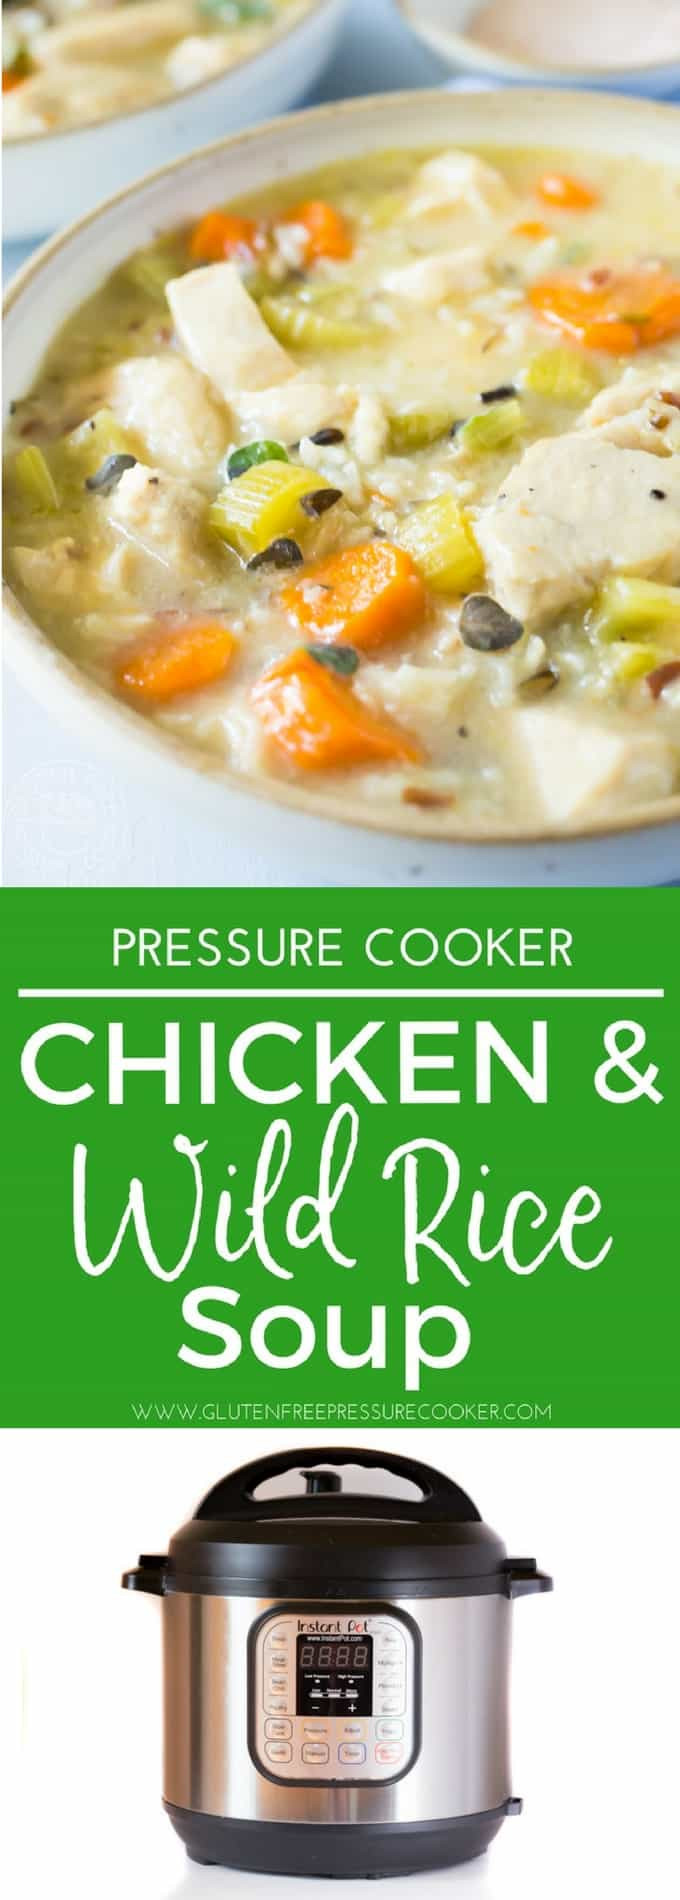 Pressure Cooker Wild Rice
 Pressure Cooker Chicken and Wild Rice Soup